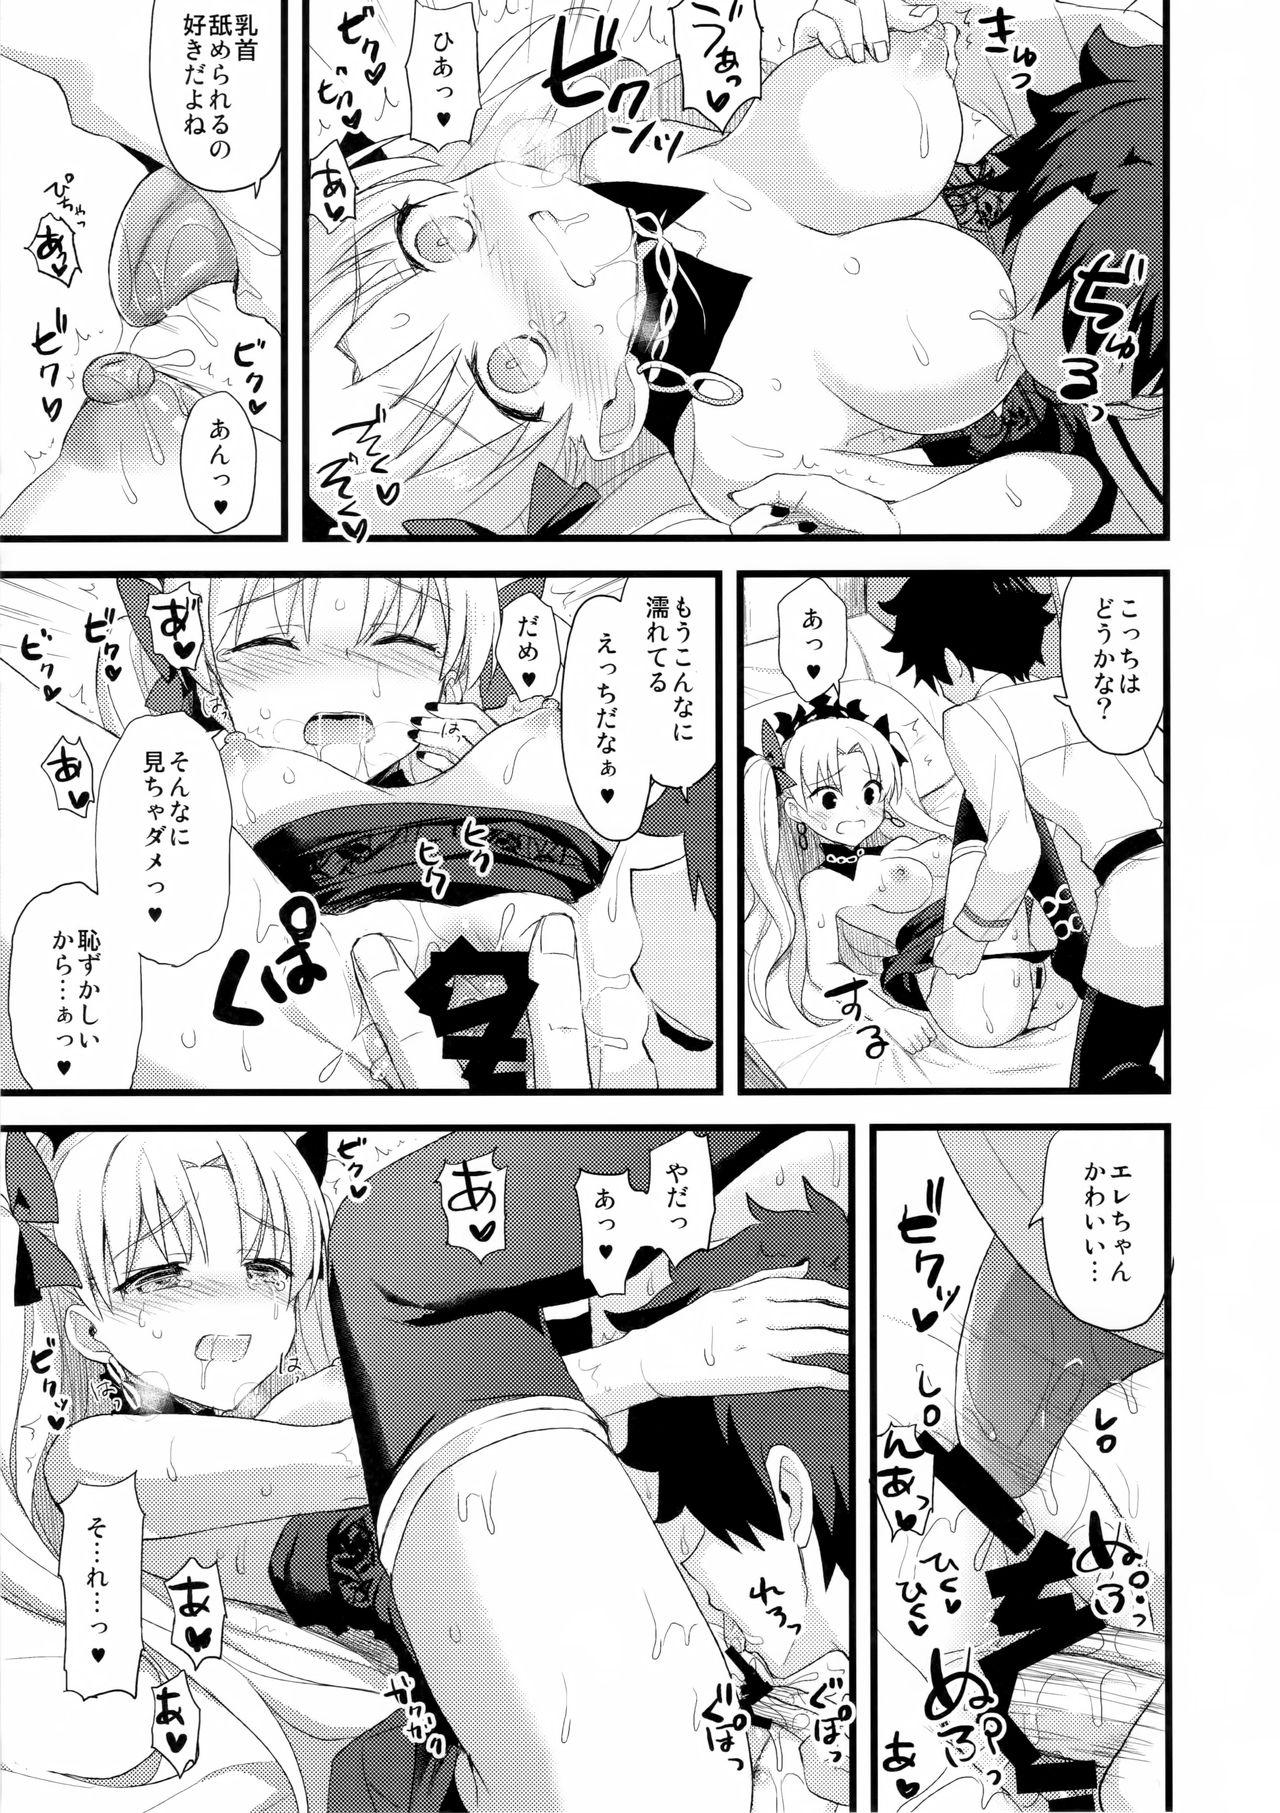 Top My Room de Ere-chan to. - Fate grand order Tinder - Page 12